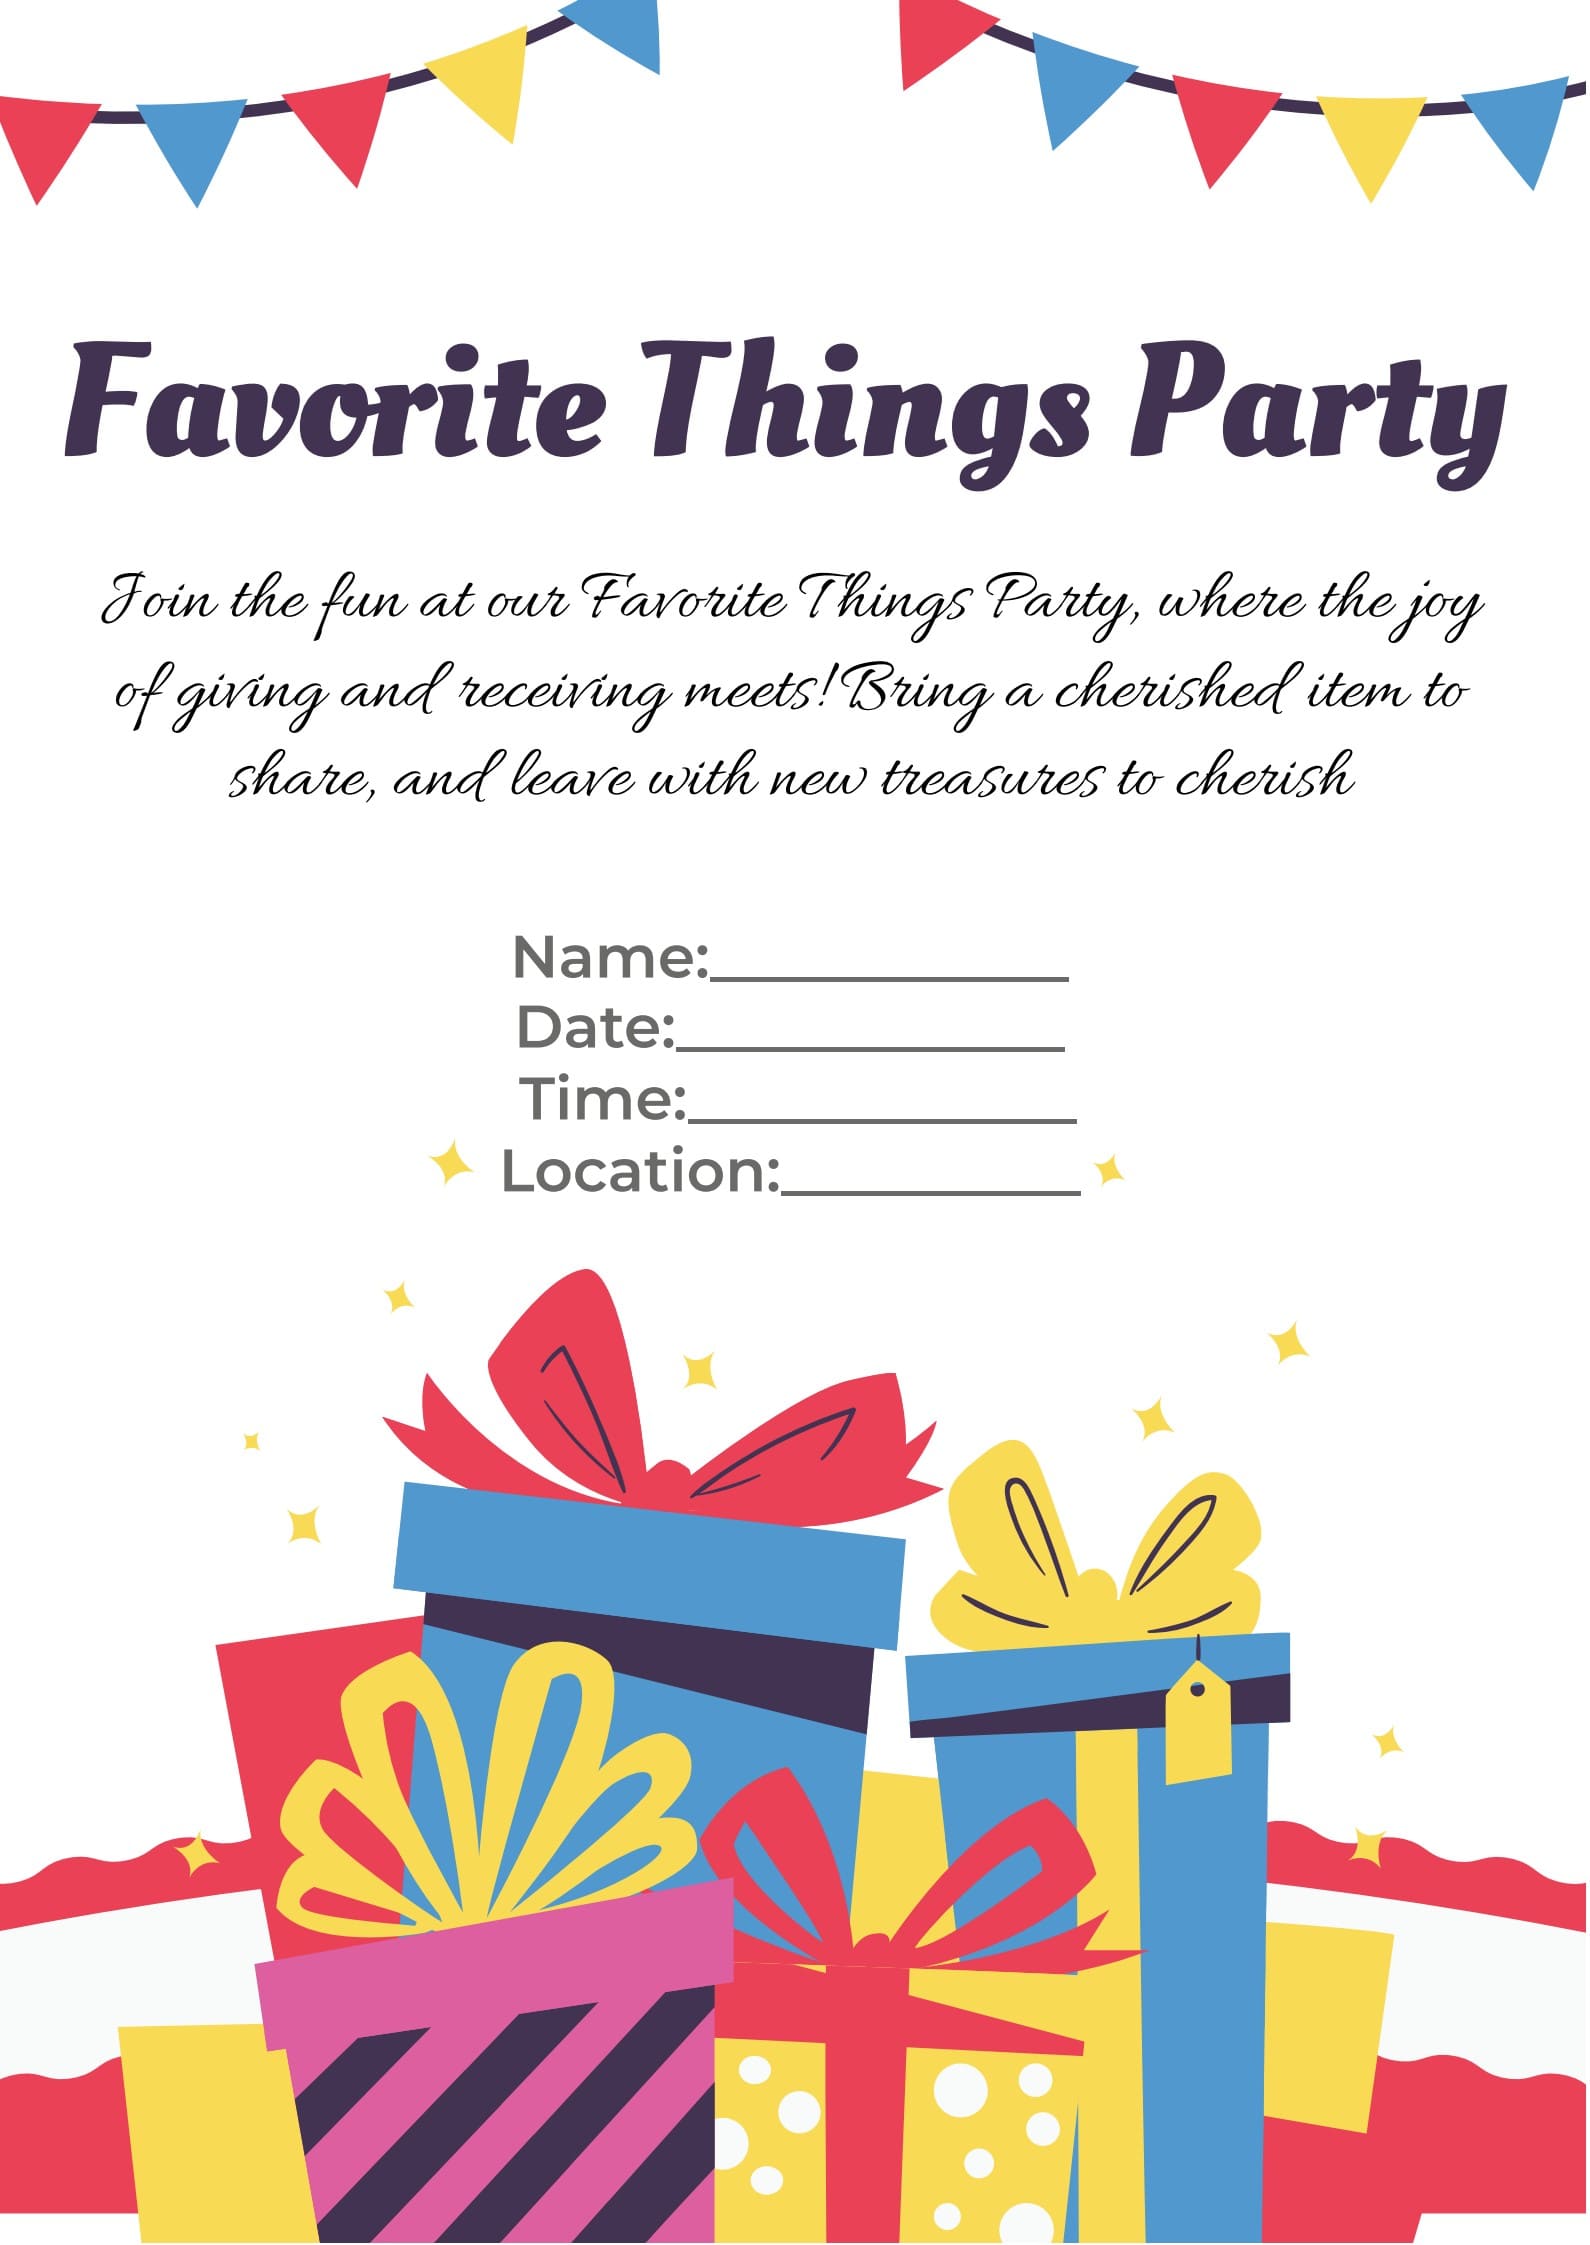 favorite things party invitation template